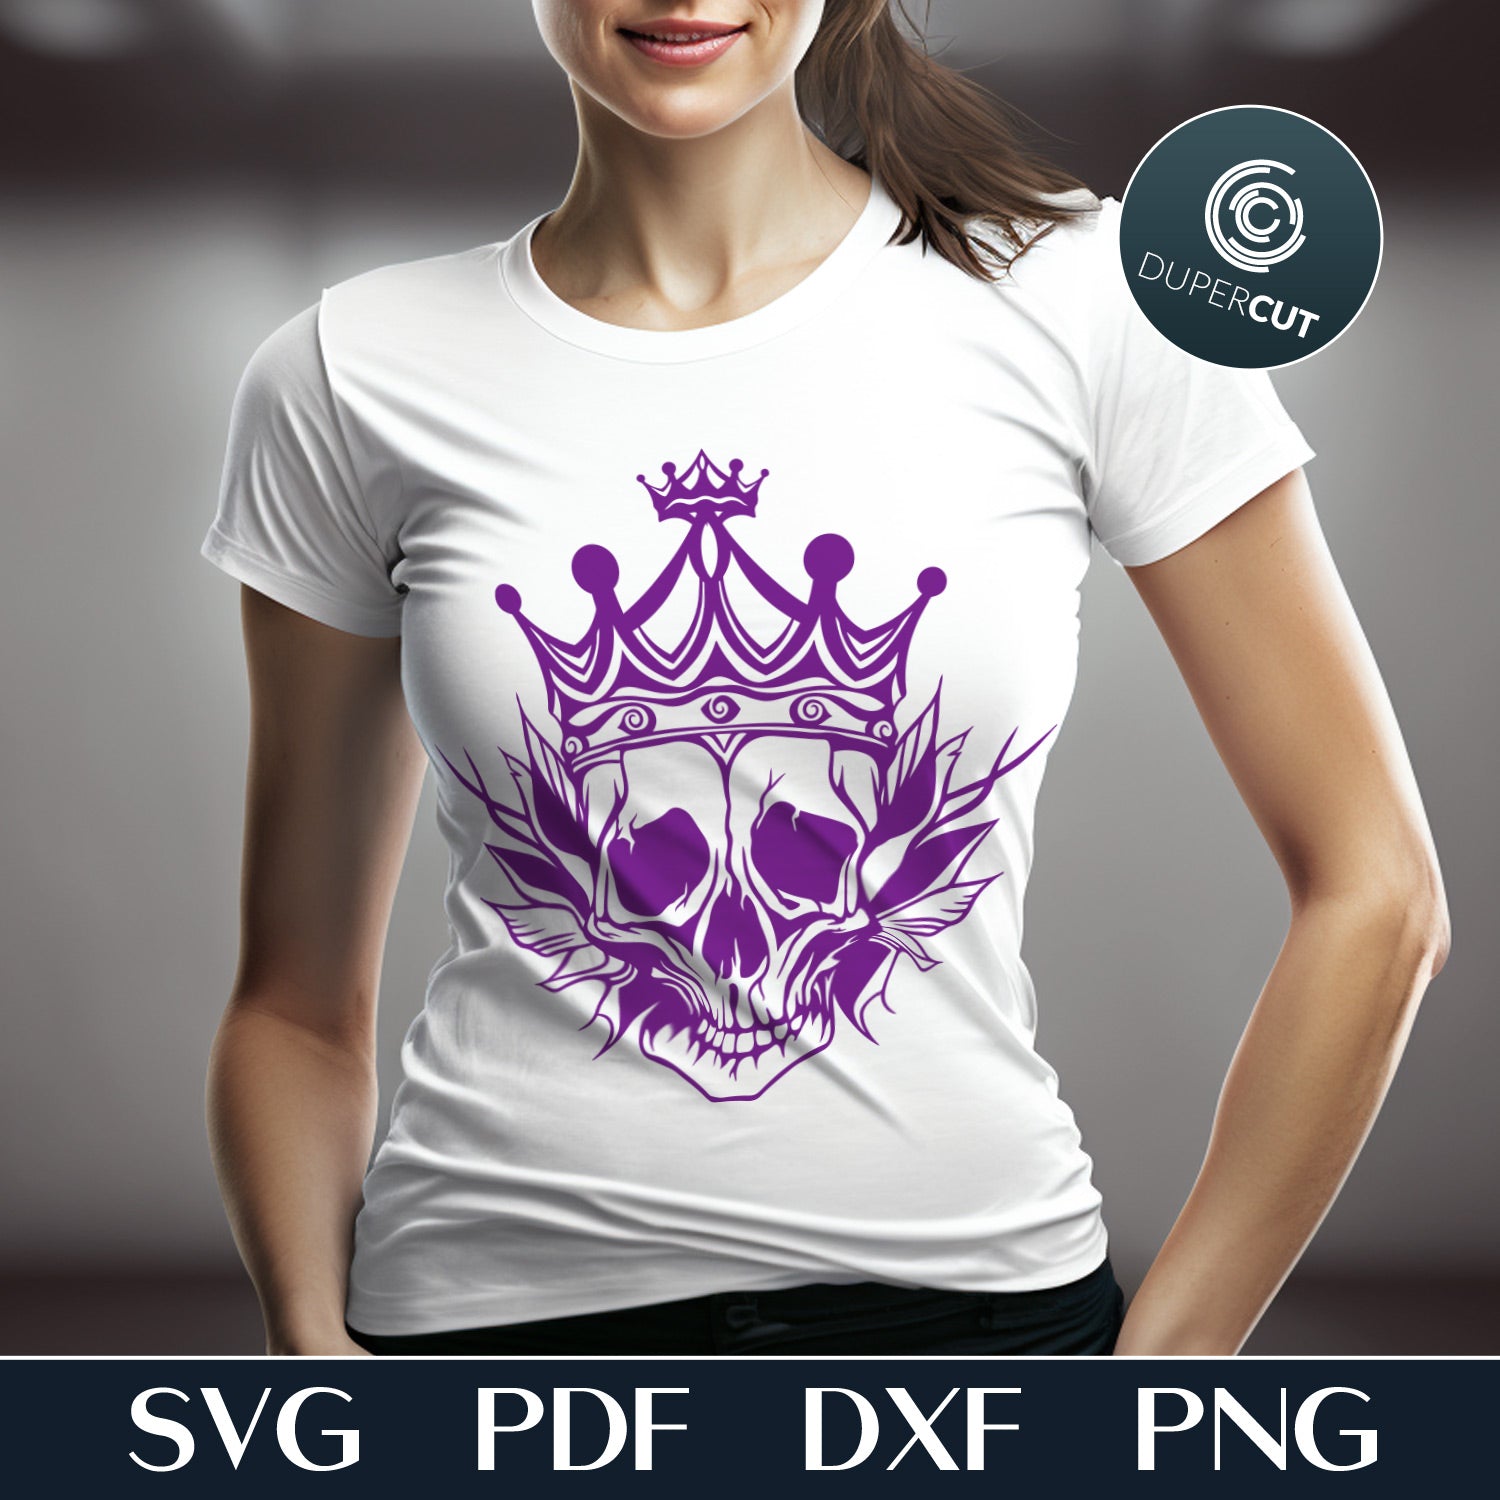 Skull king with crown, steampunk gothic design for sublimation, t-shirts, tumblers, mugs, stickers  - SVG DXF PNG vector files for Glowforge, Cricut, silhouette Cameo, CNC plasma machines by www.DuperCut.com